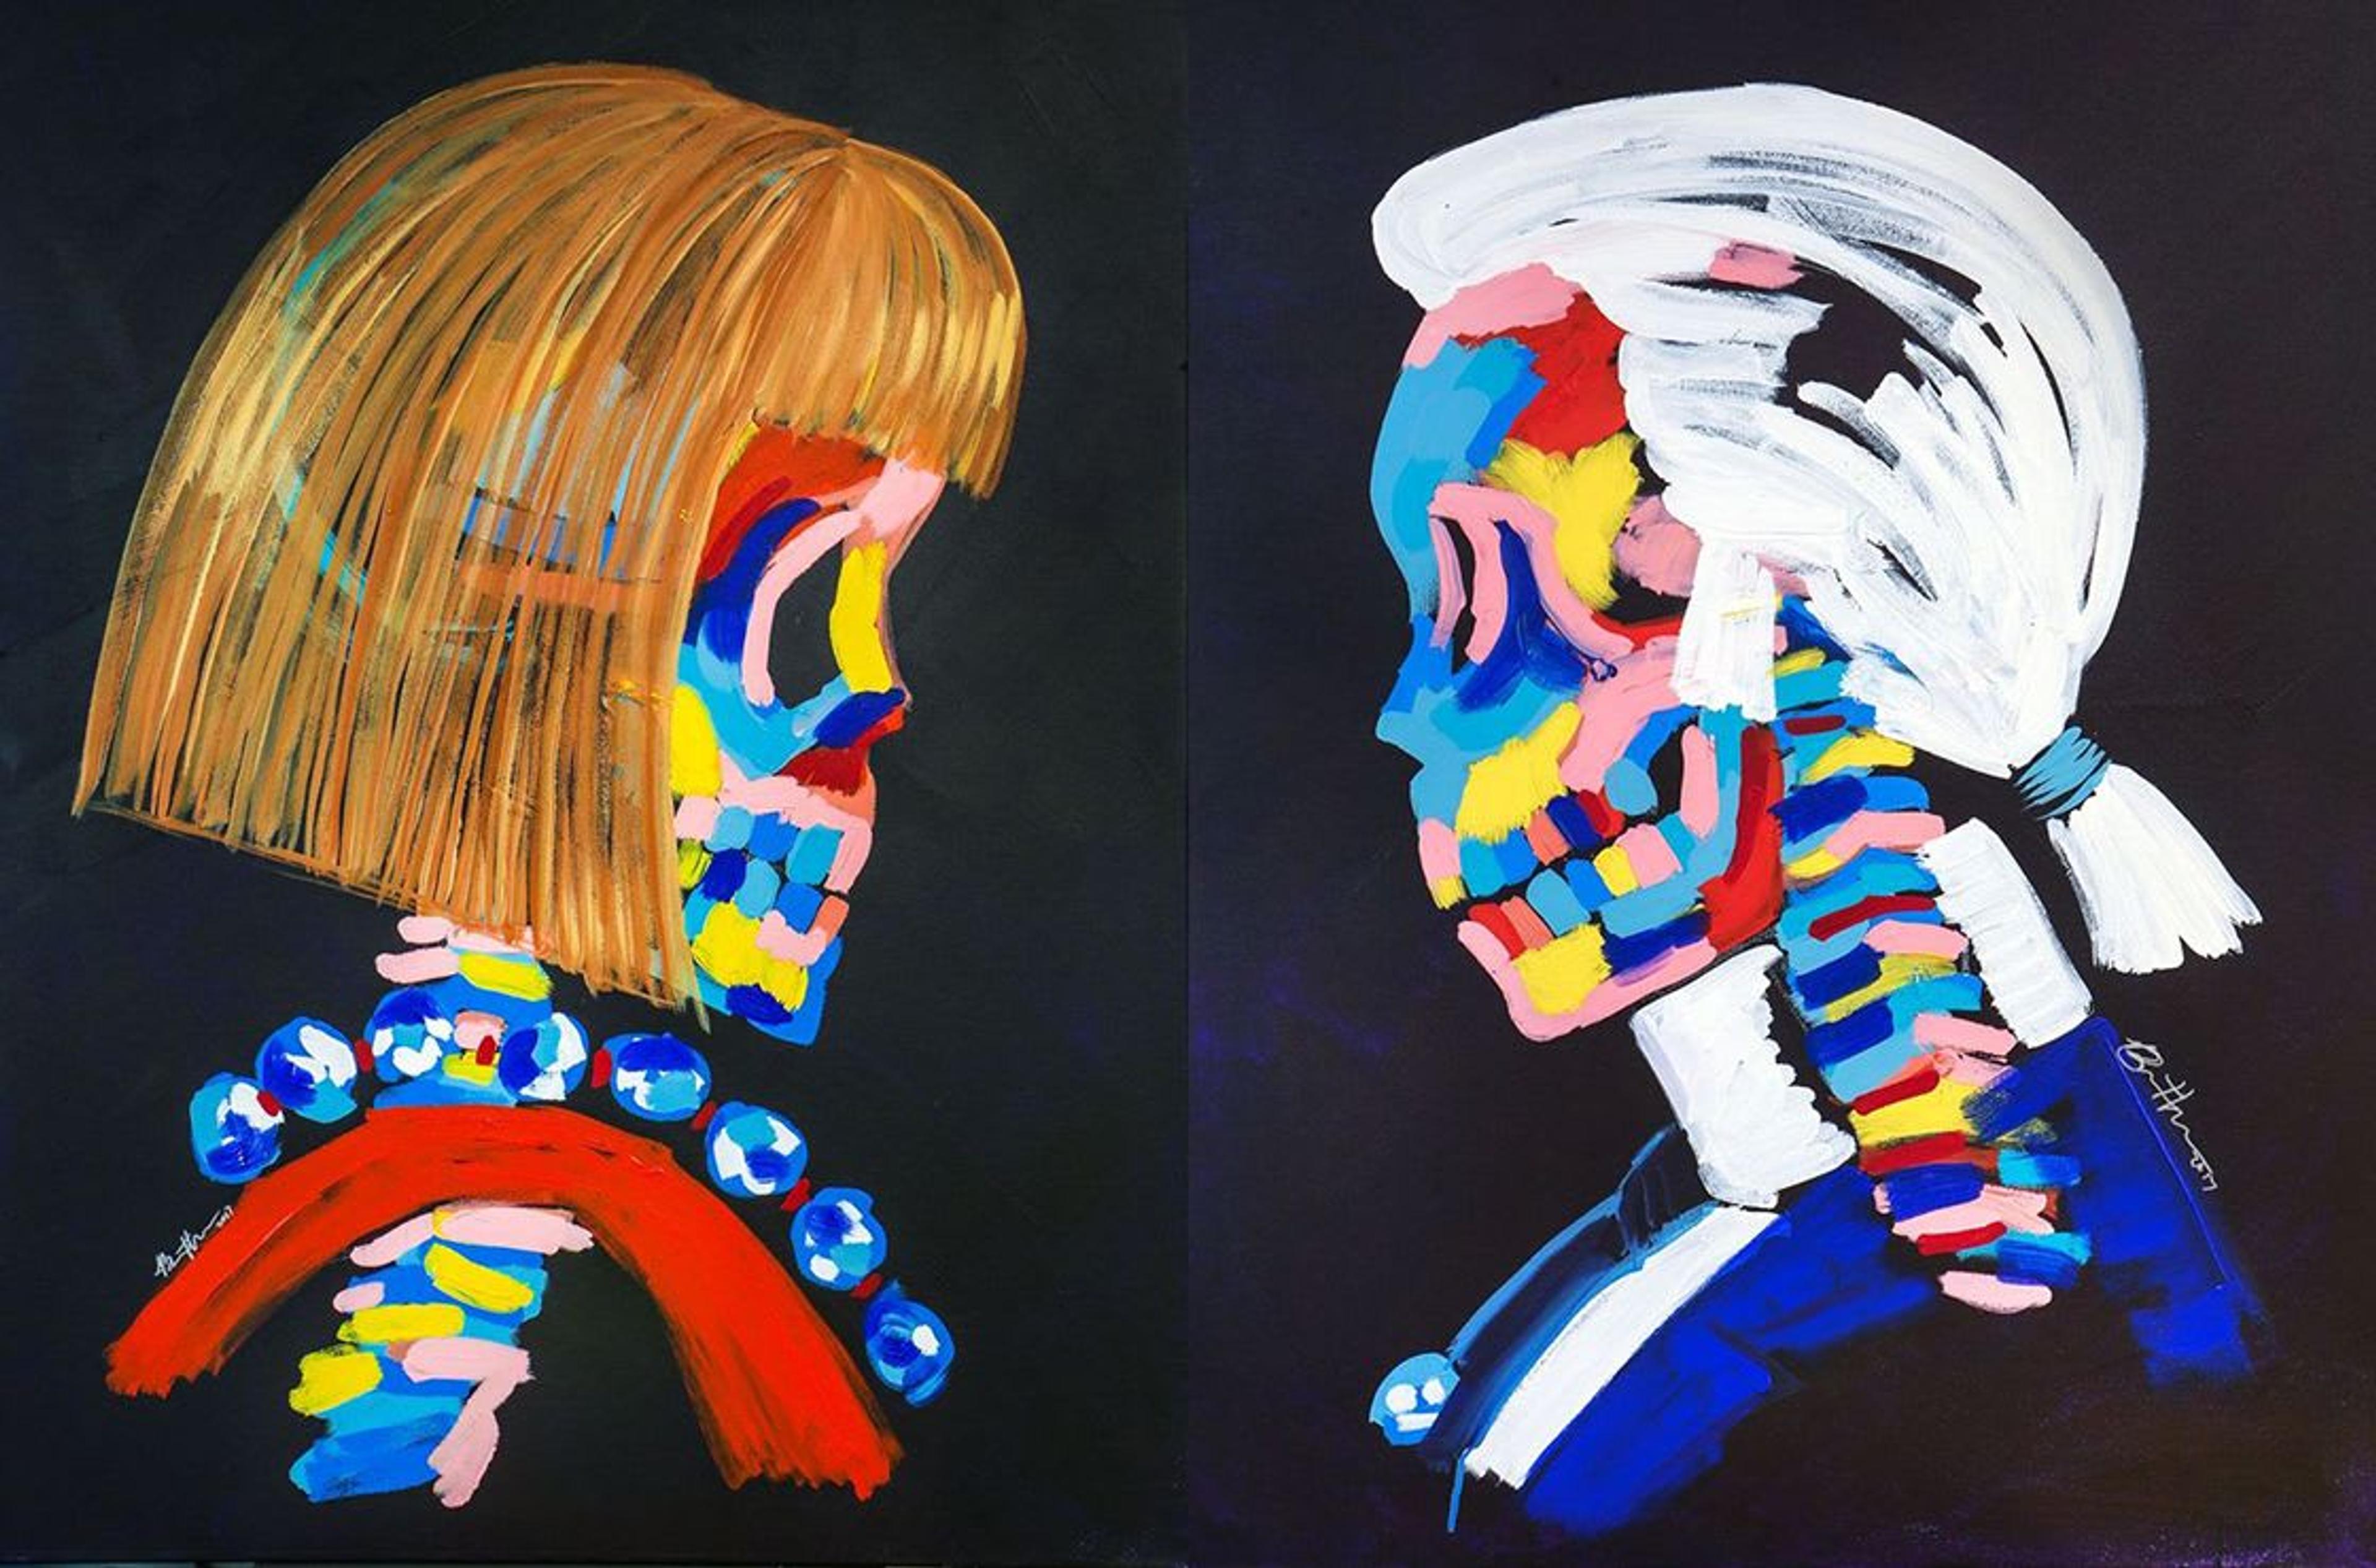  Karl Lagerfeld et Anna Wintour par Bradley Theodore. The Second Coming, Galerie Maddox.